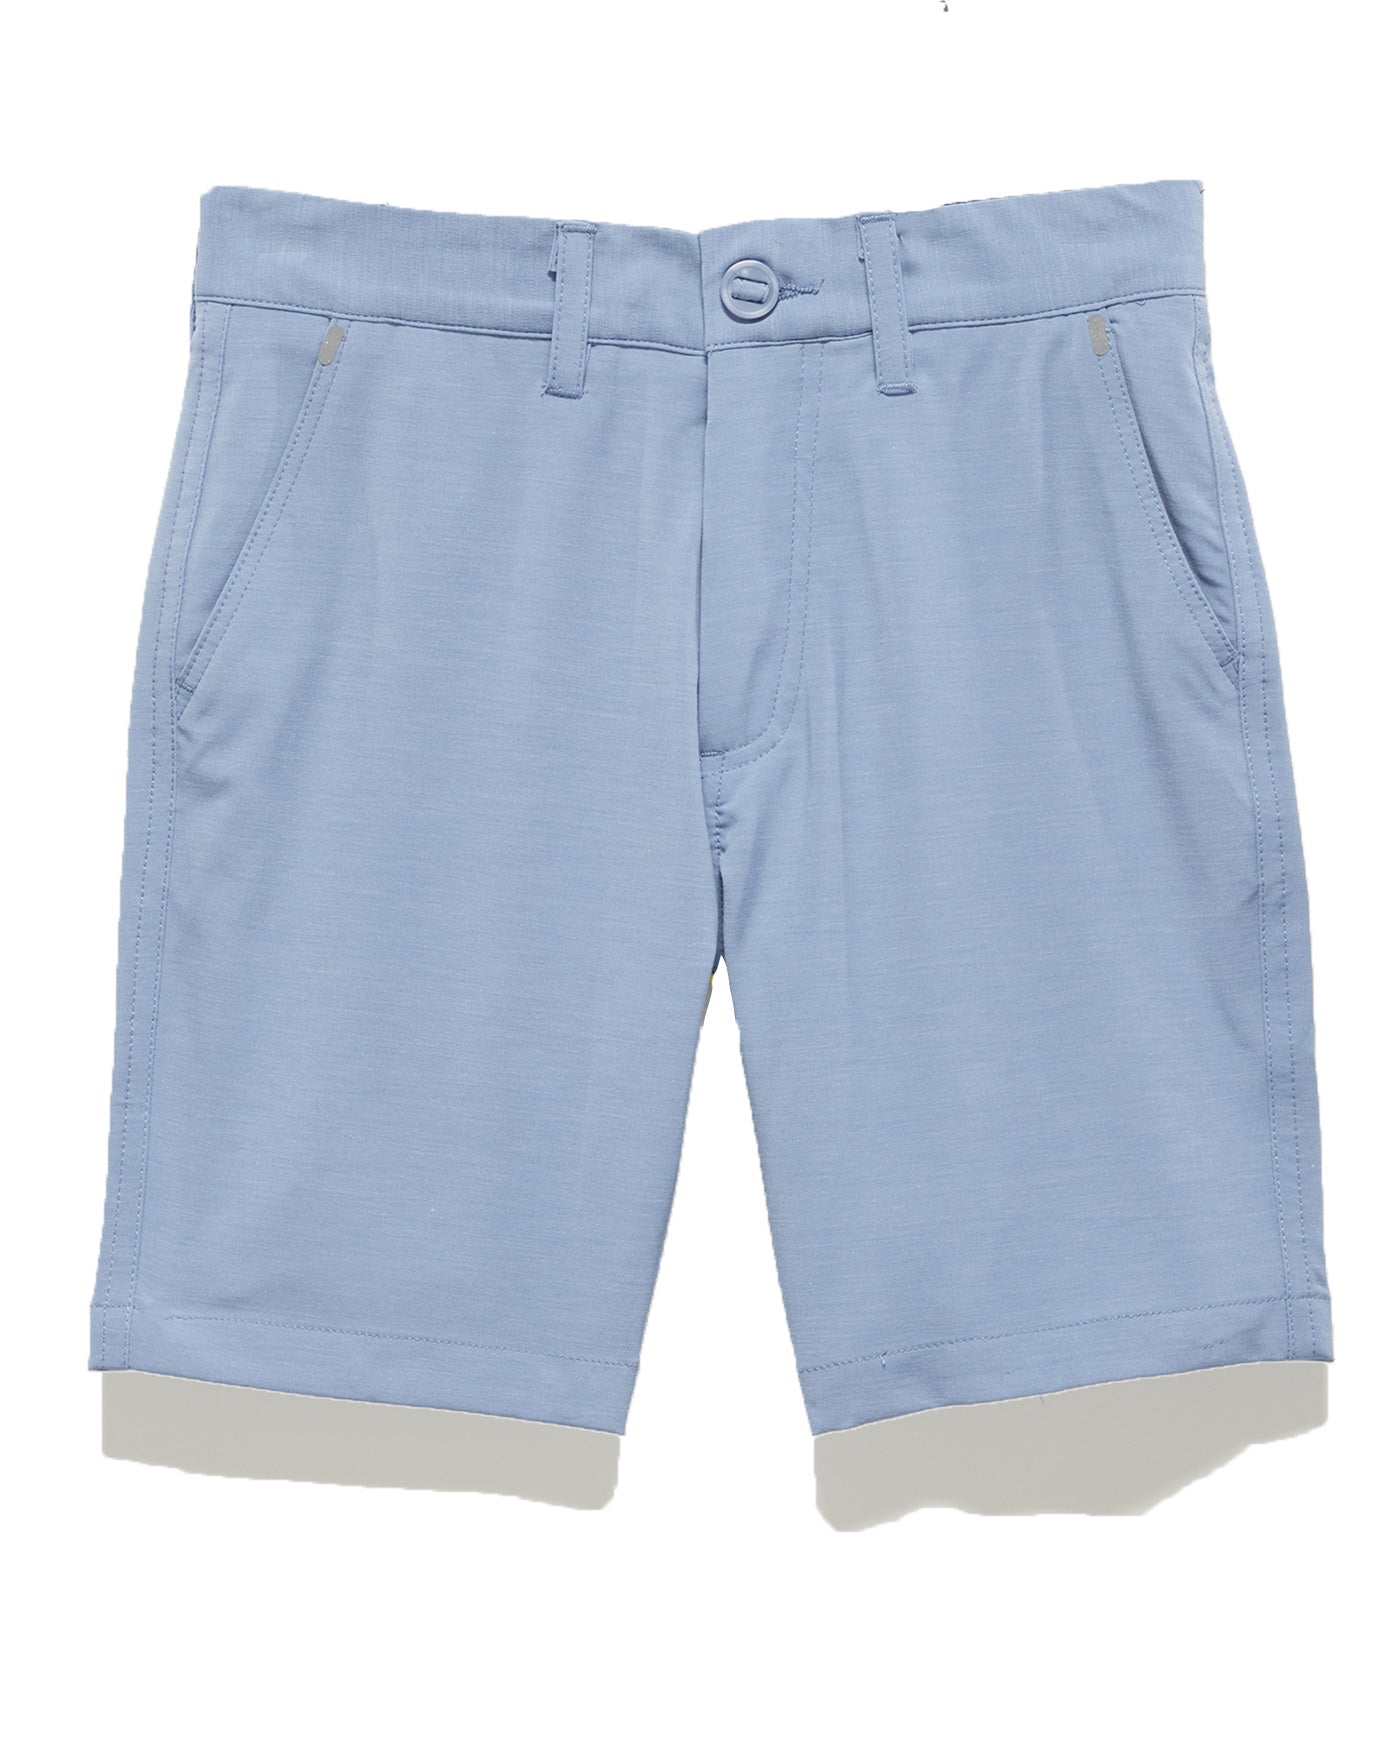 BOYS COTTON BLEND ANY-WEAR PERFORMANCE SHORT - 8 INCH